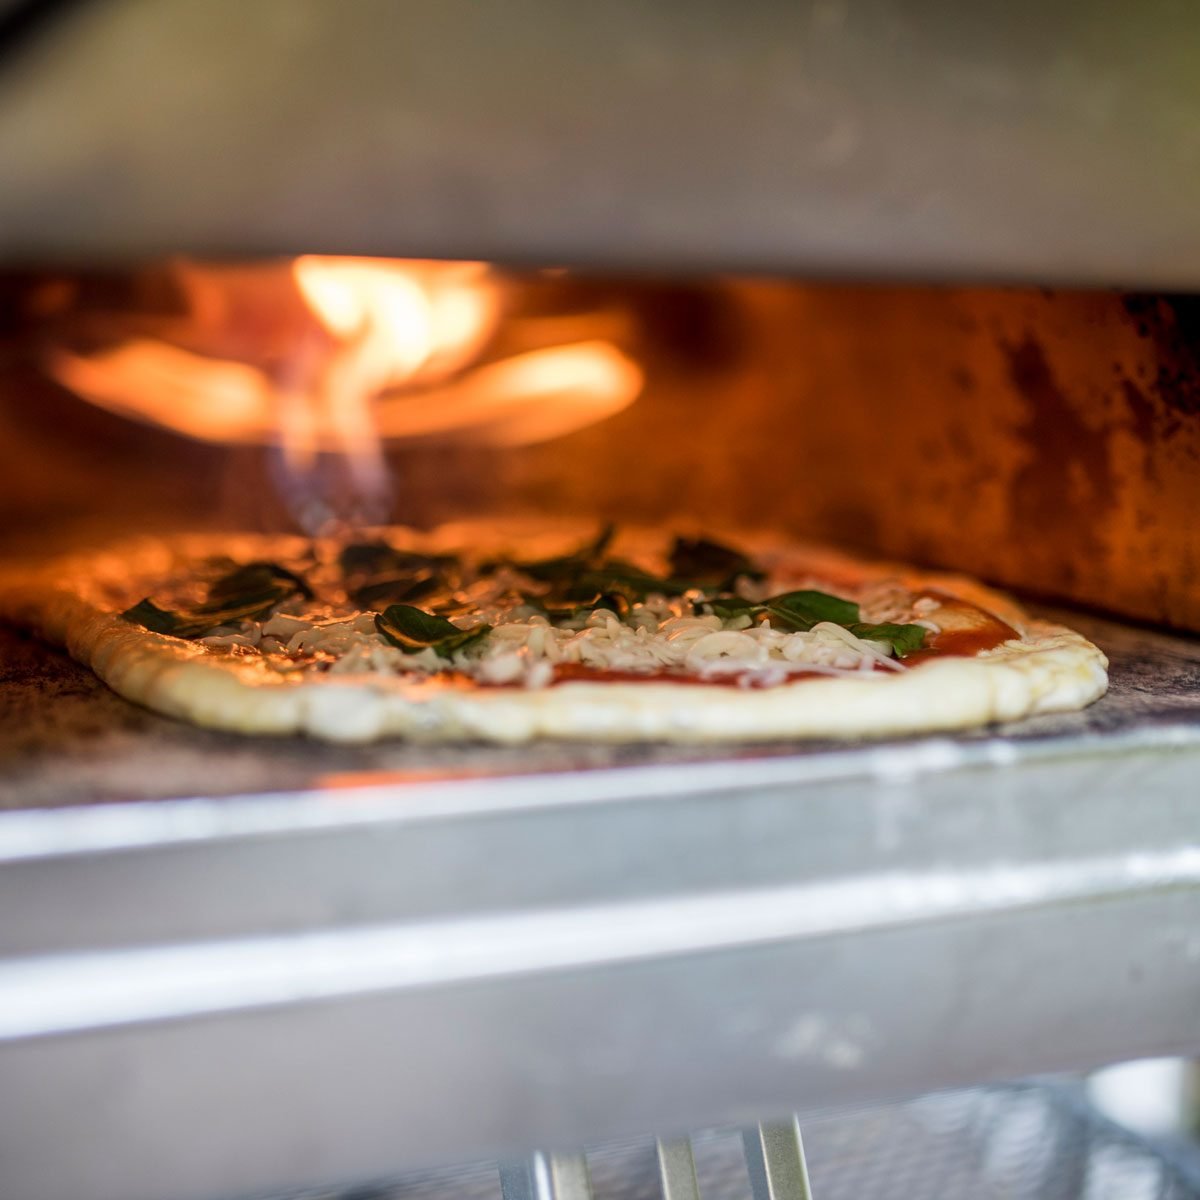 Can you bake bread in a pizza oven? The experts reveal